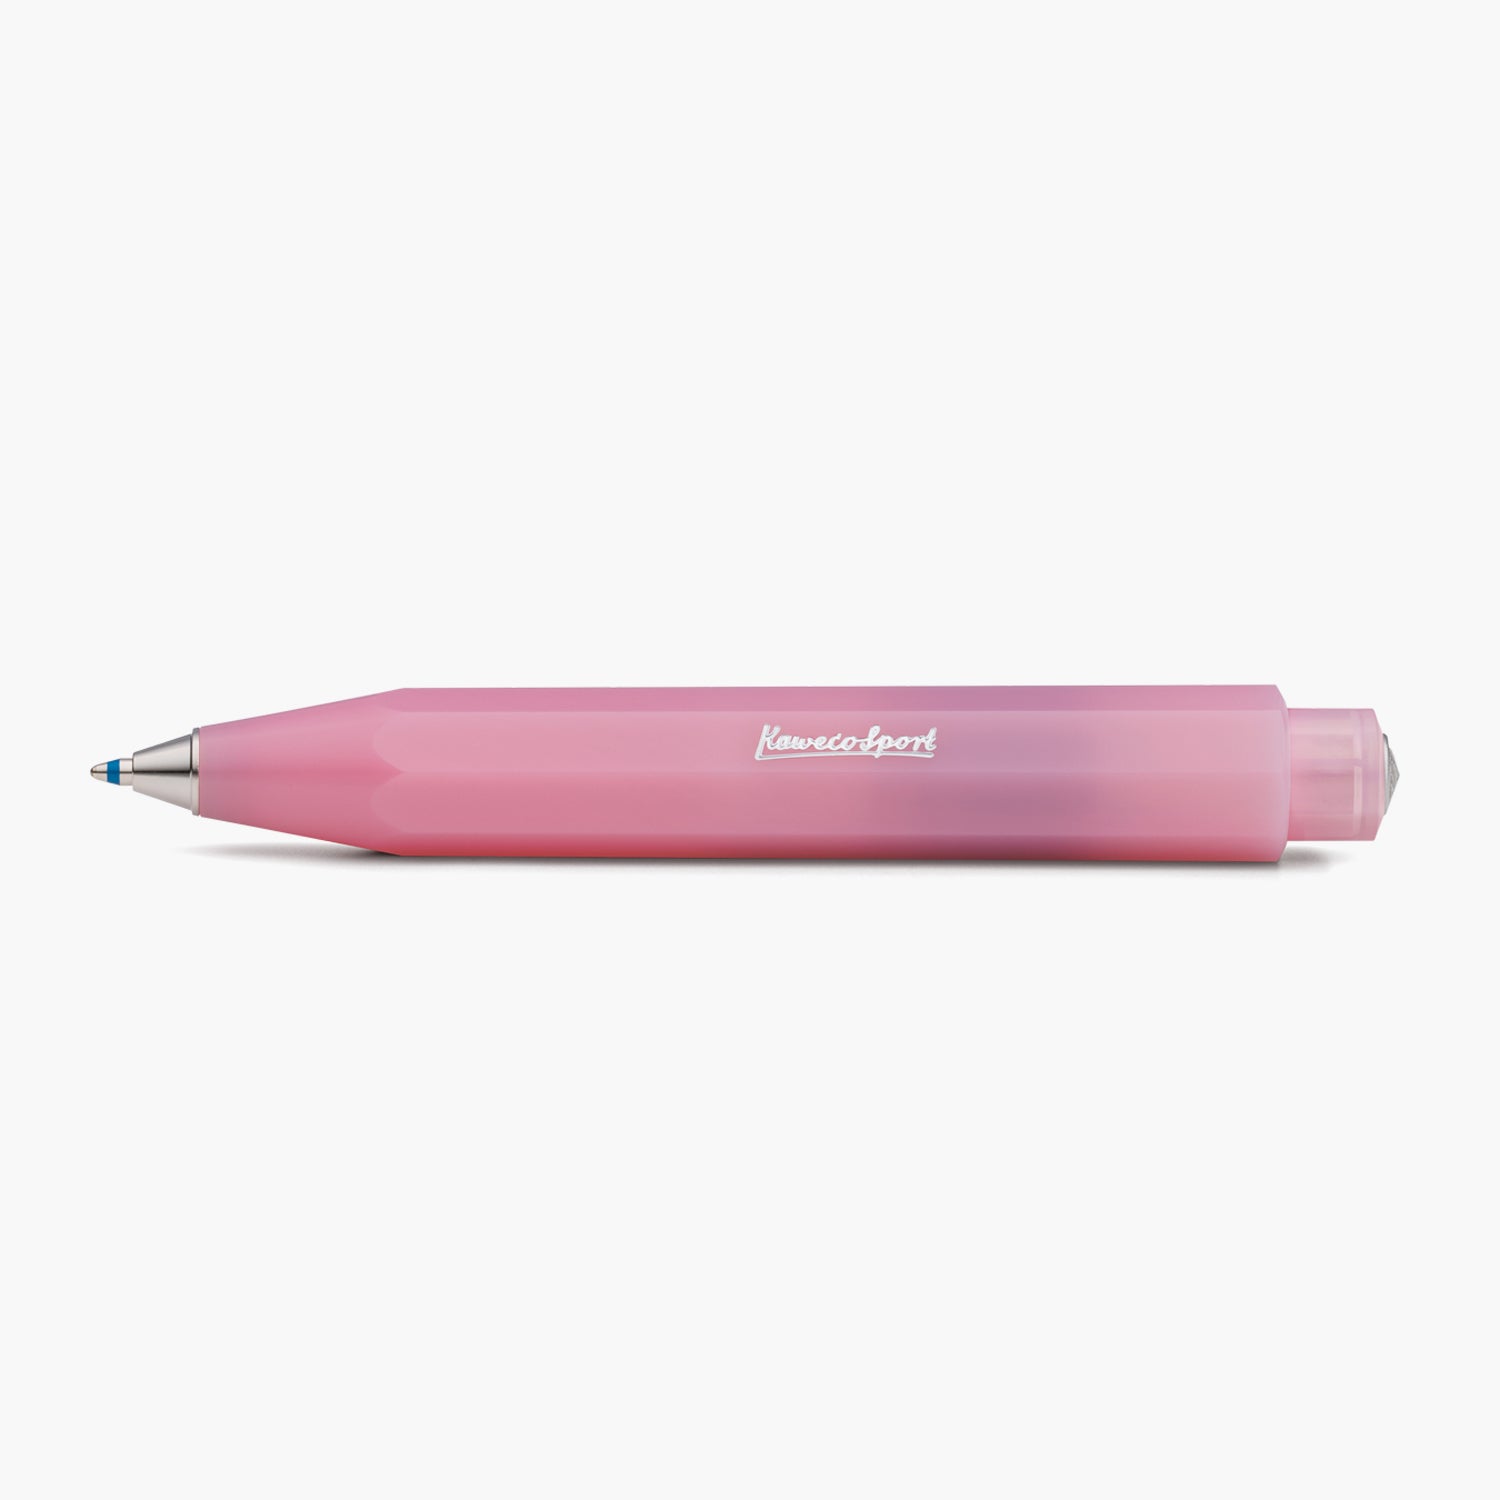 Frosted Sport Ballpoint Pen - Blush Pink from Kaweco